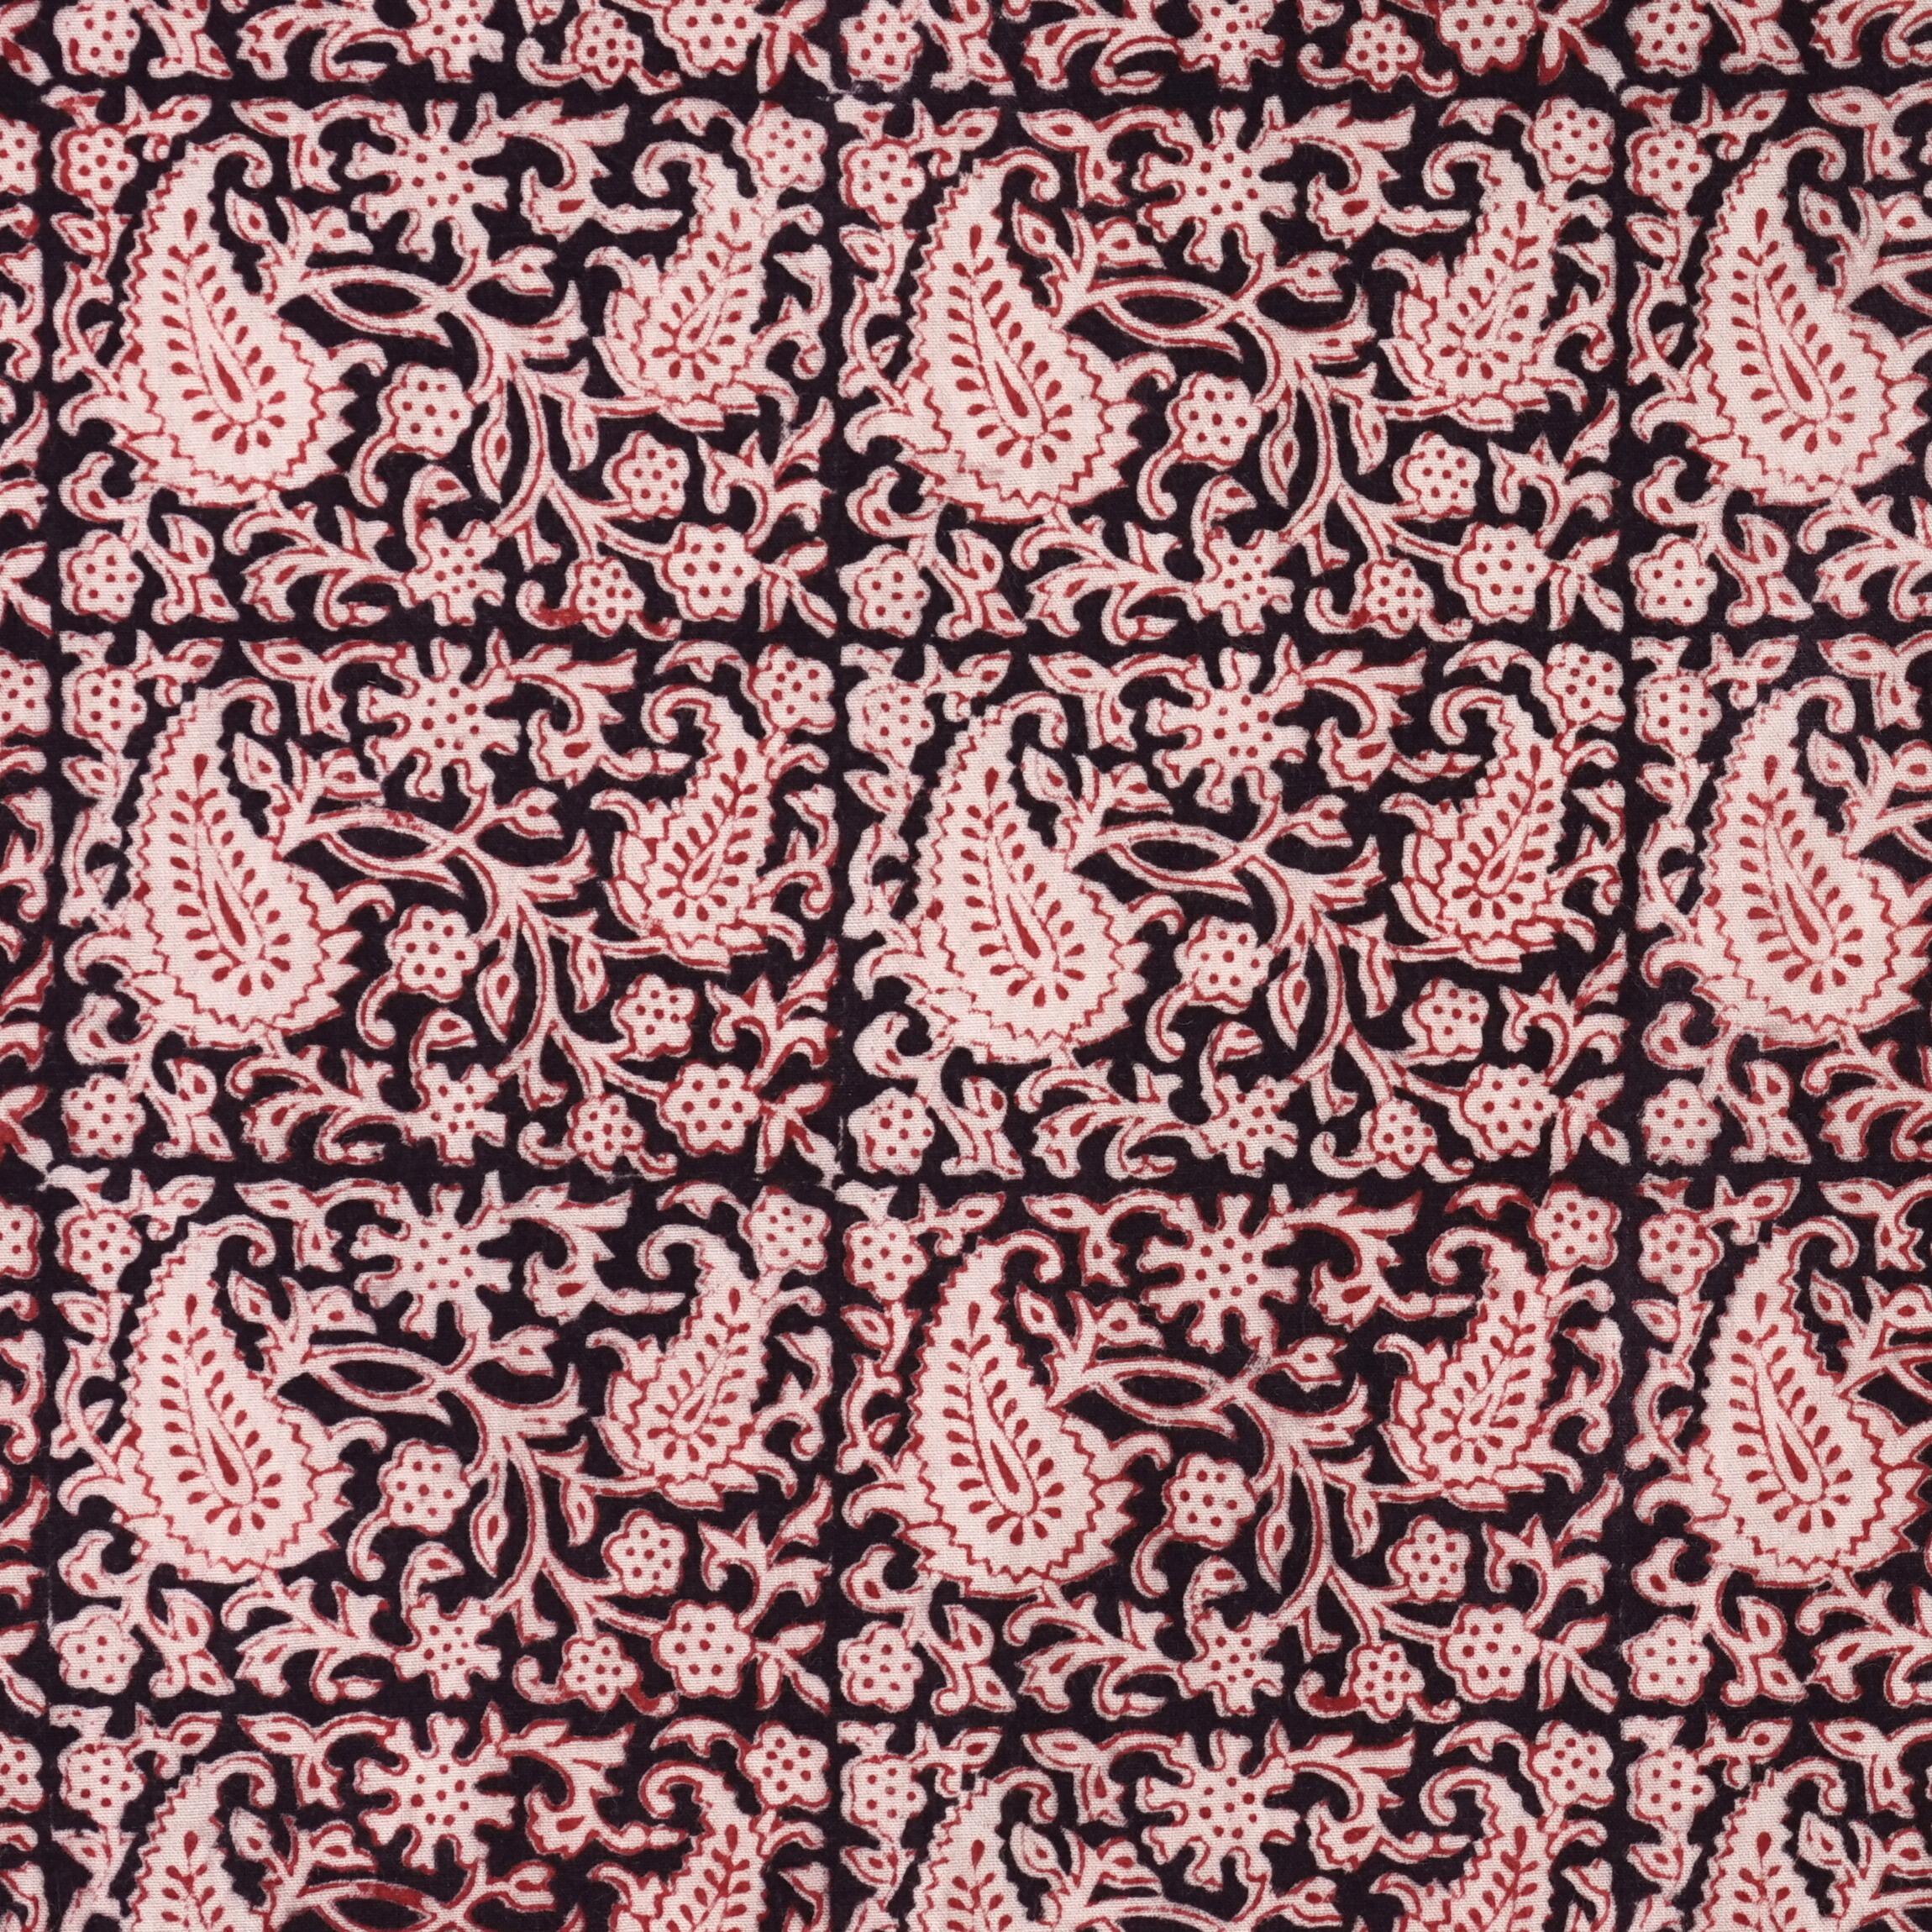 100% Block-Printed Cotton Fabric From India- Bagh - Iron Rust Black Alizarin Red Tulgey Wood Print - Flat